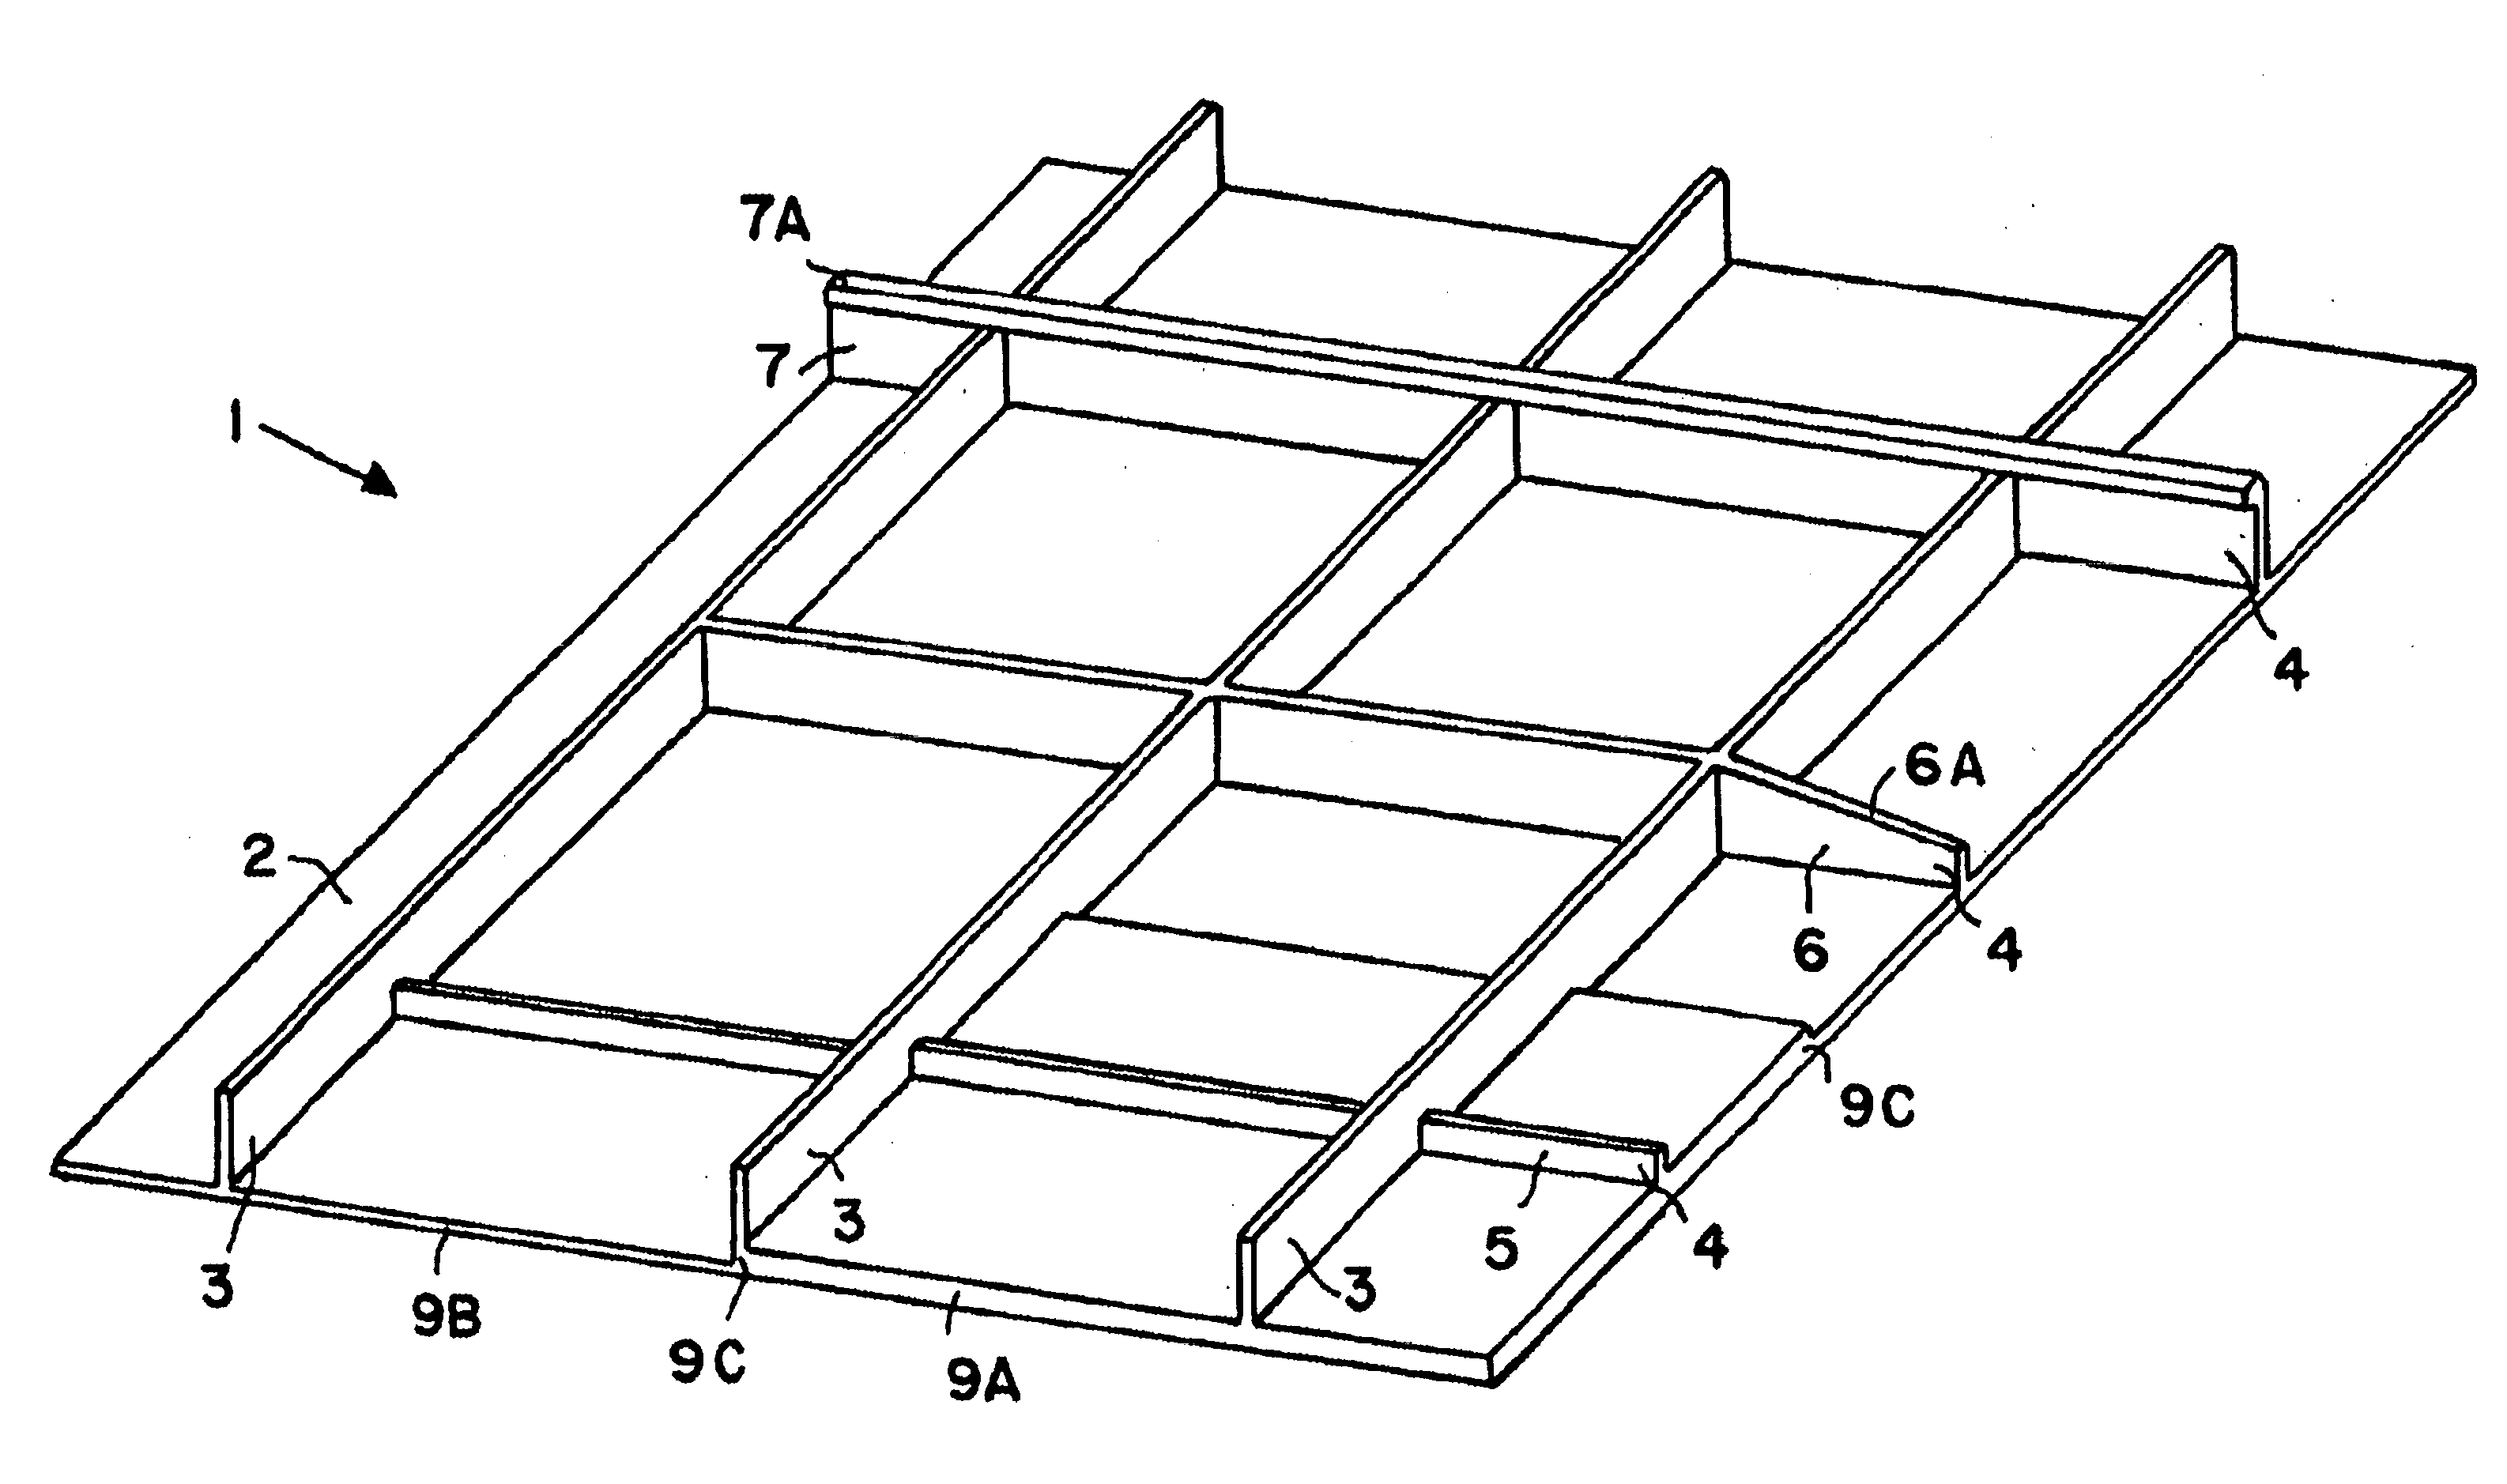 Integral structural shell component for an aircraft and method of manufacturing the same